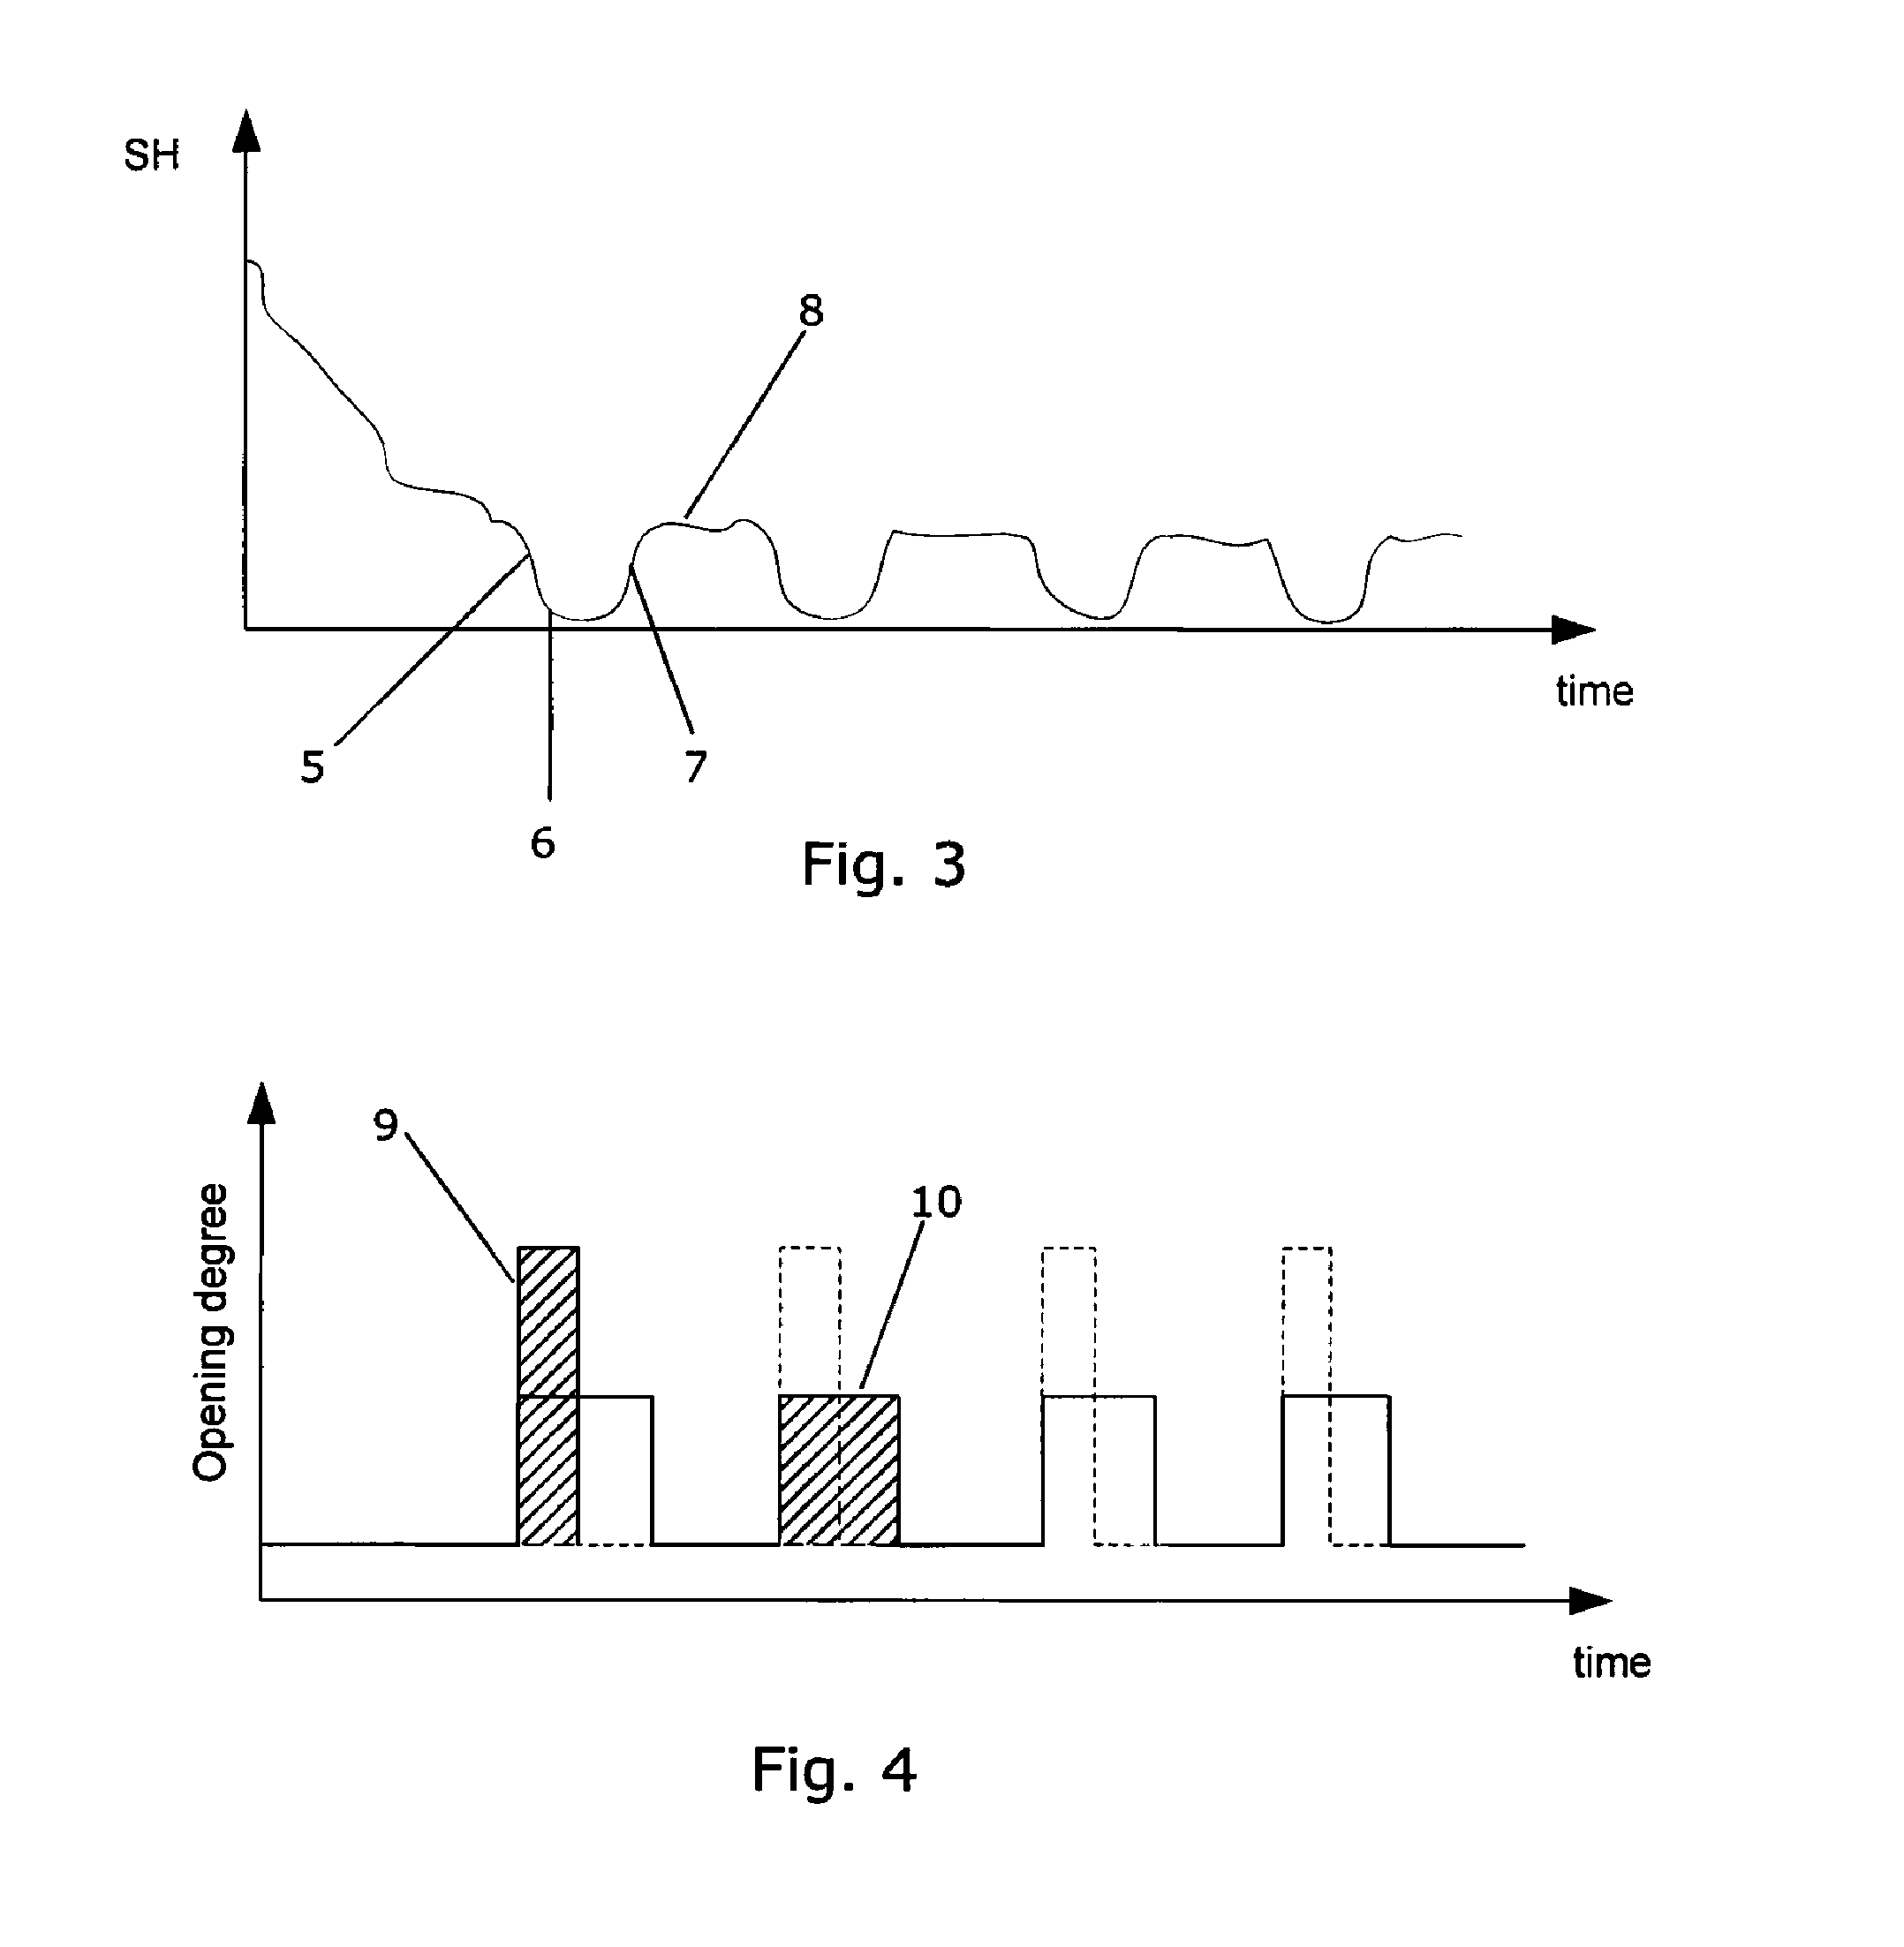 Method for controlling a flow of refrigerant to an evaporator